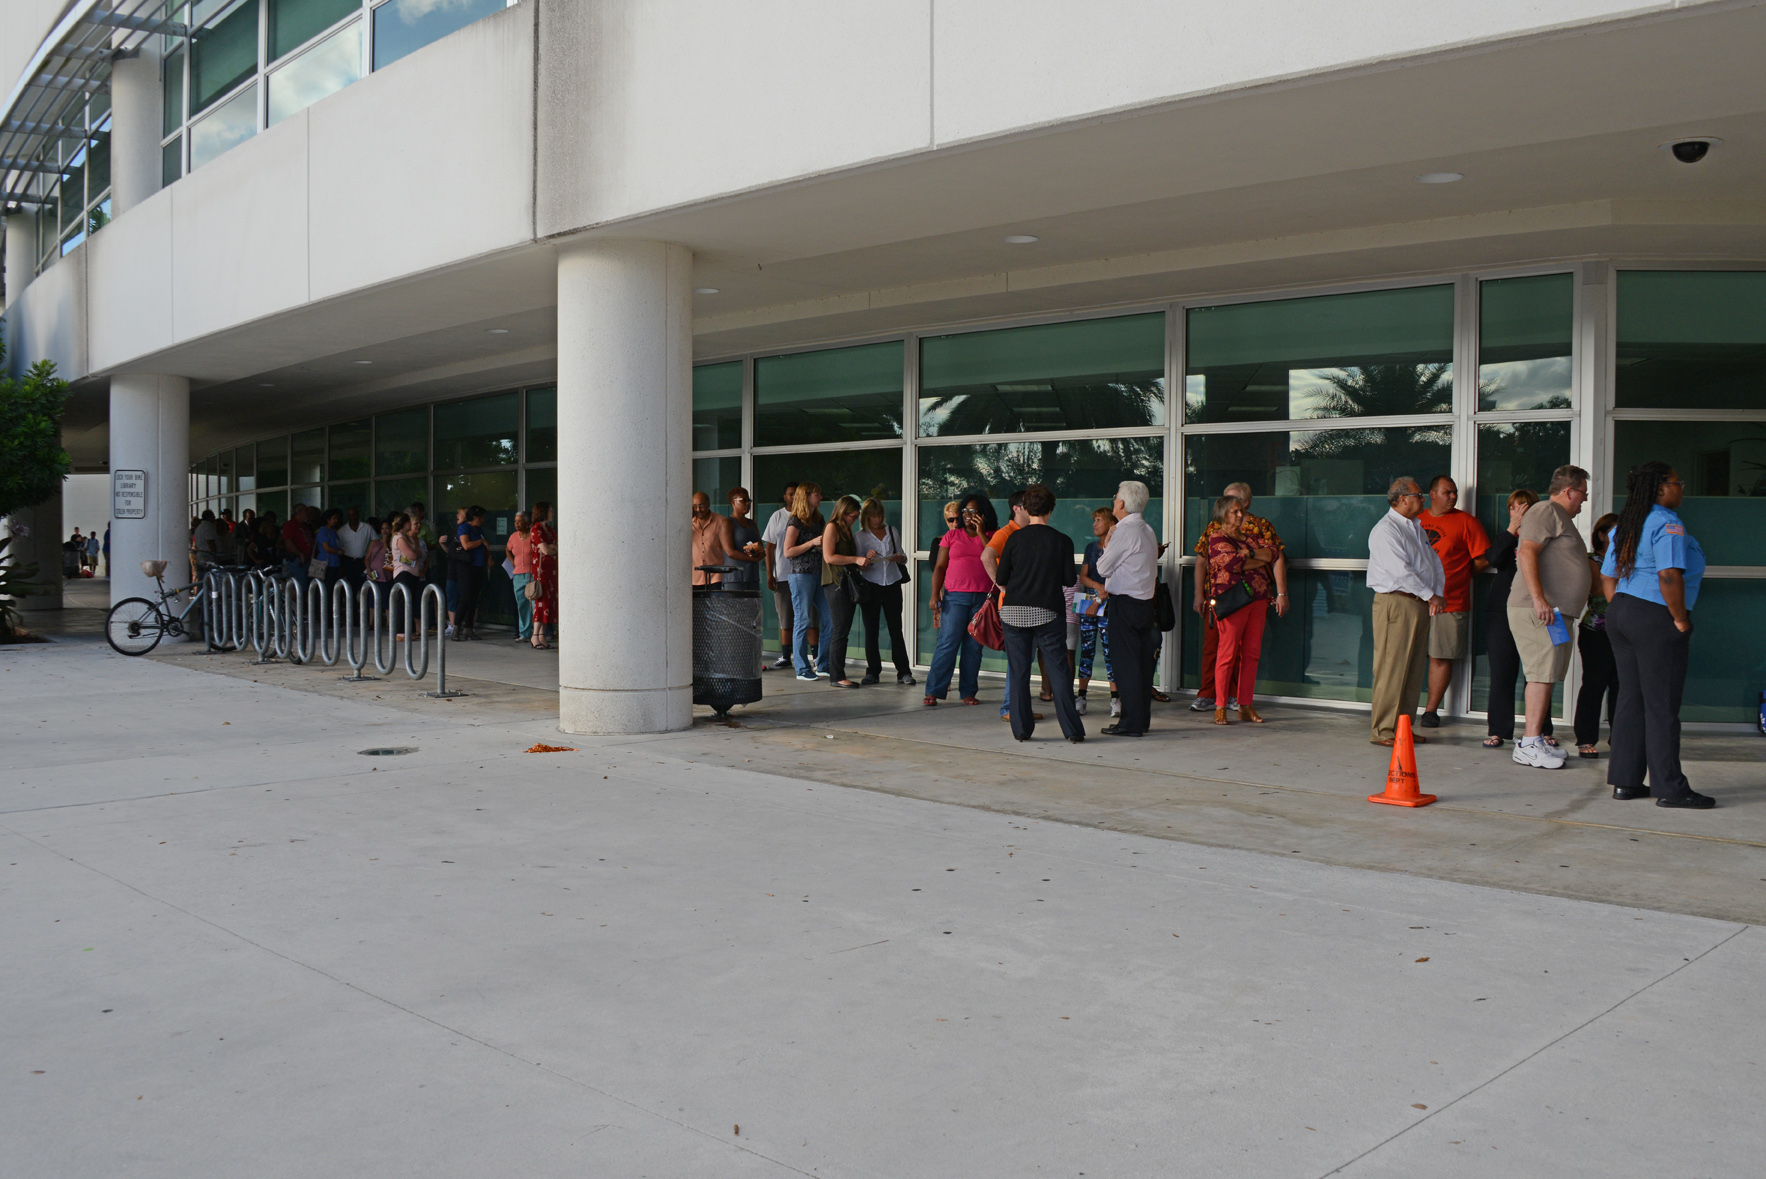 Voters were lined up at the polls at Northwest Regional Library in Coral Springs.